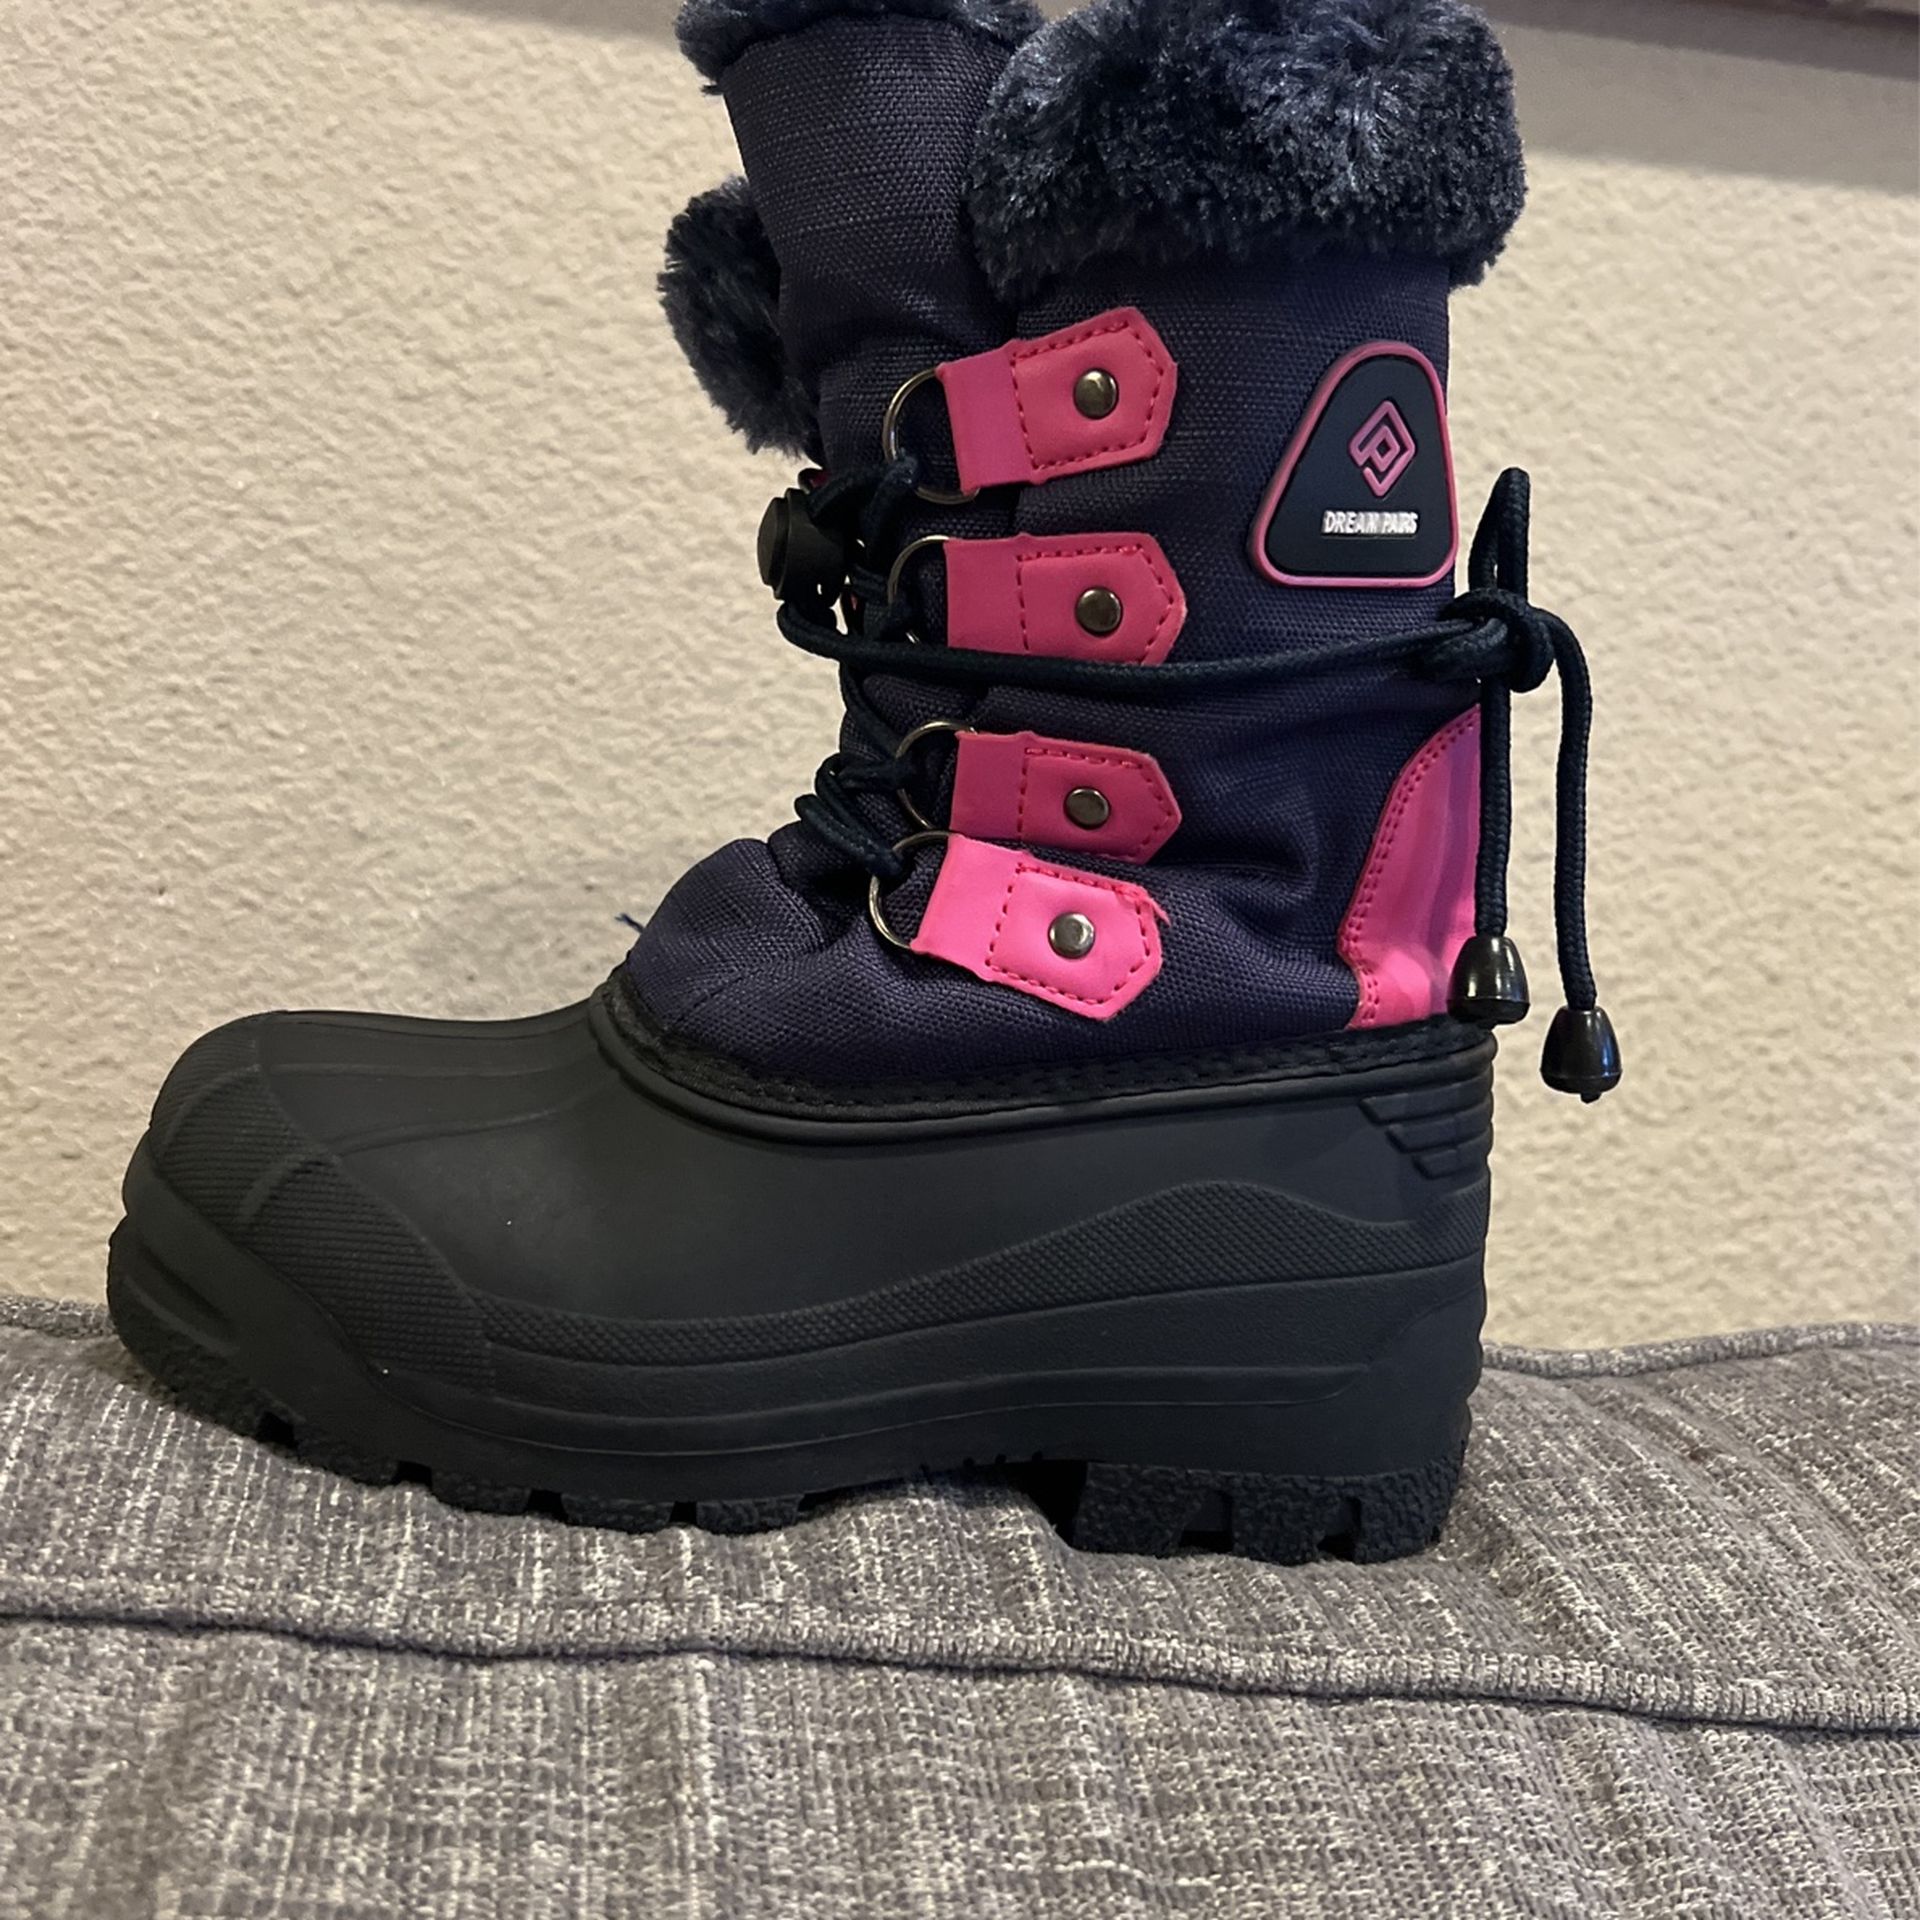 Snow Boots Girl Size 11